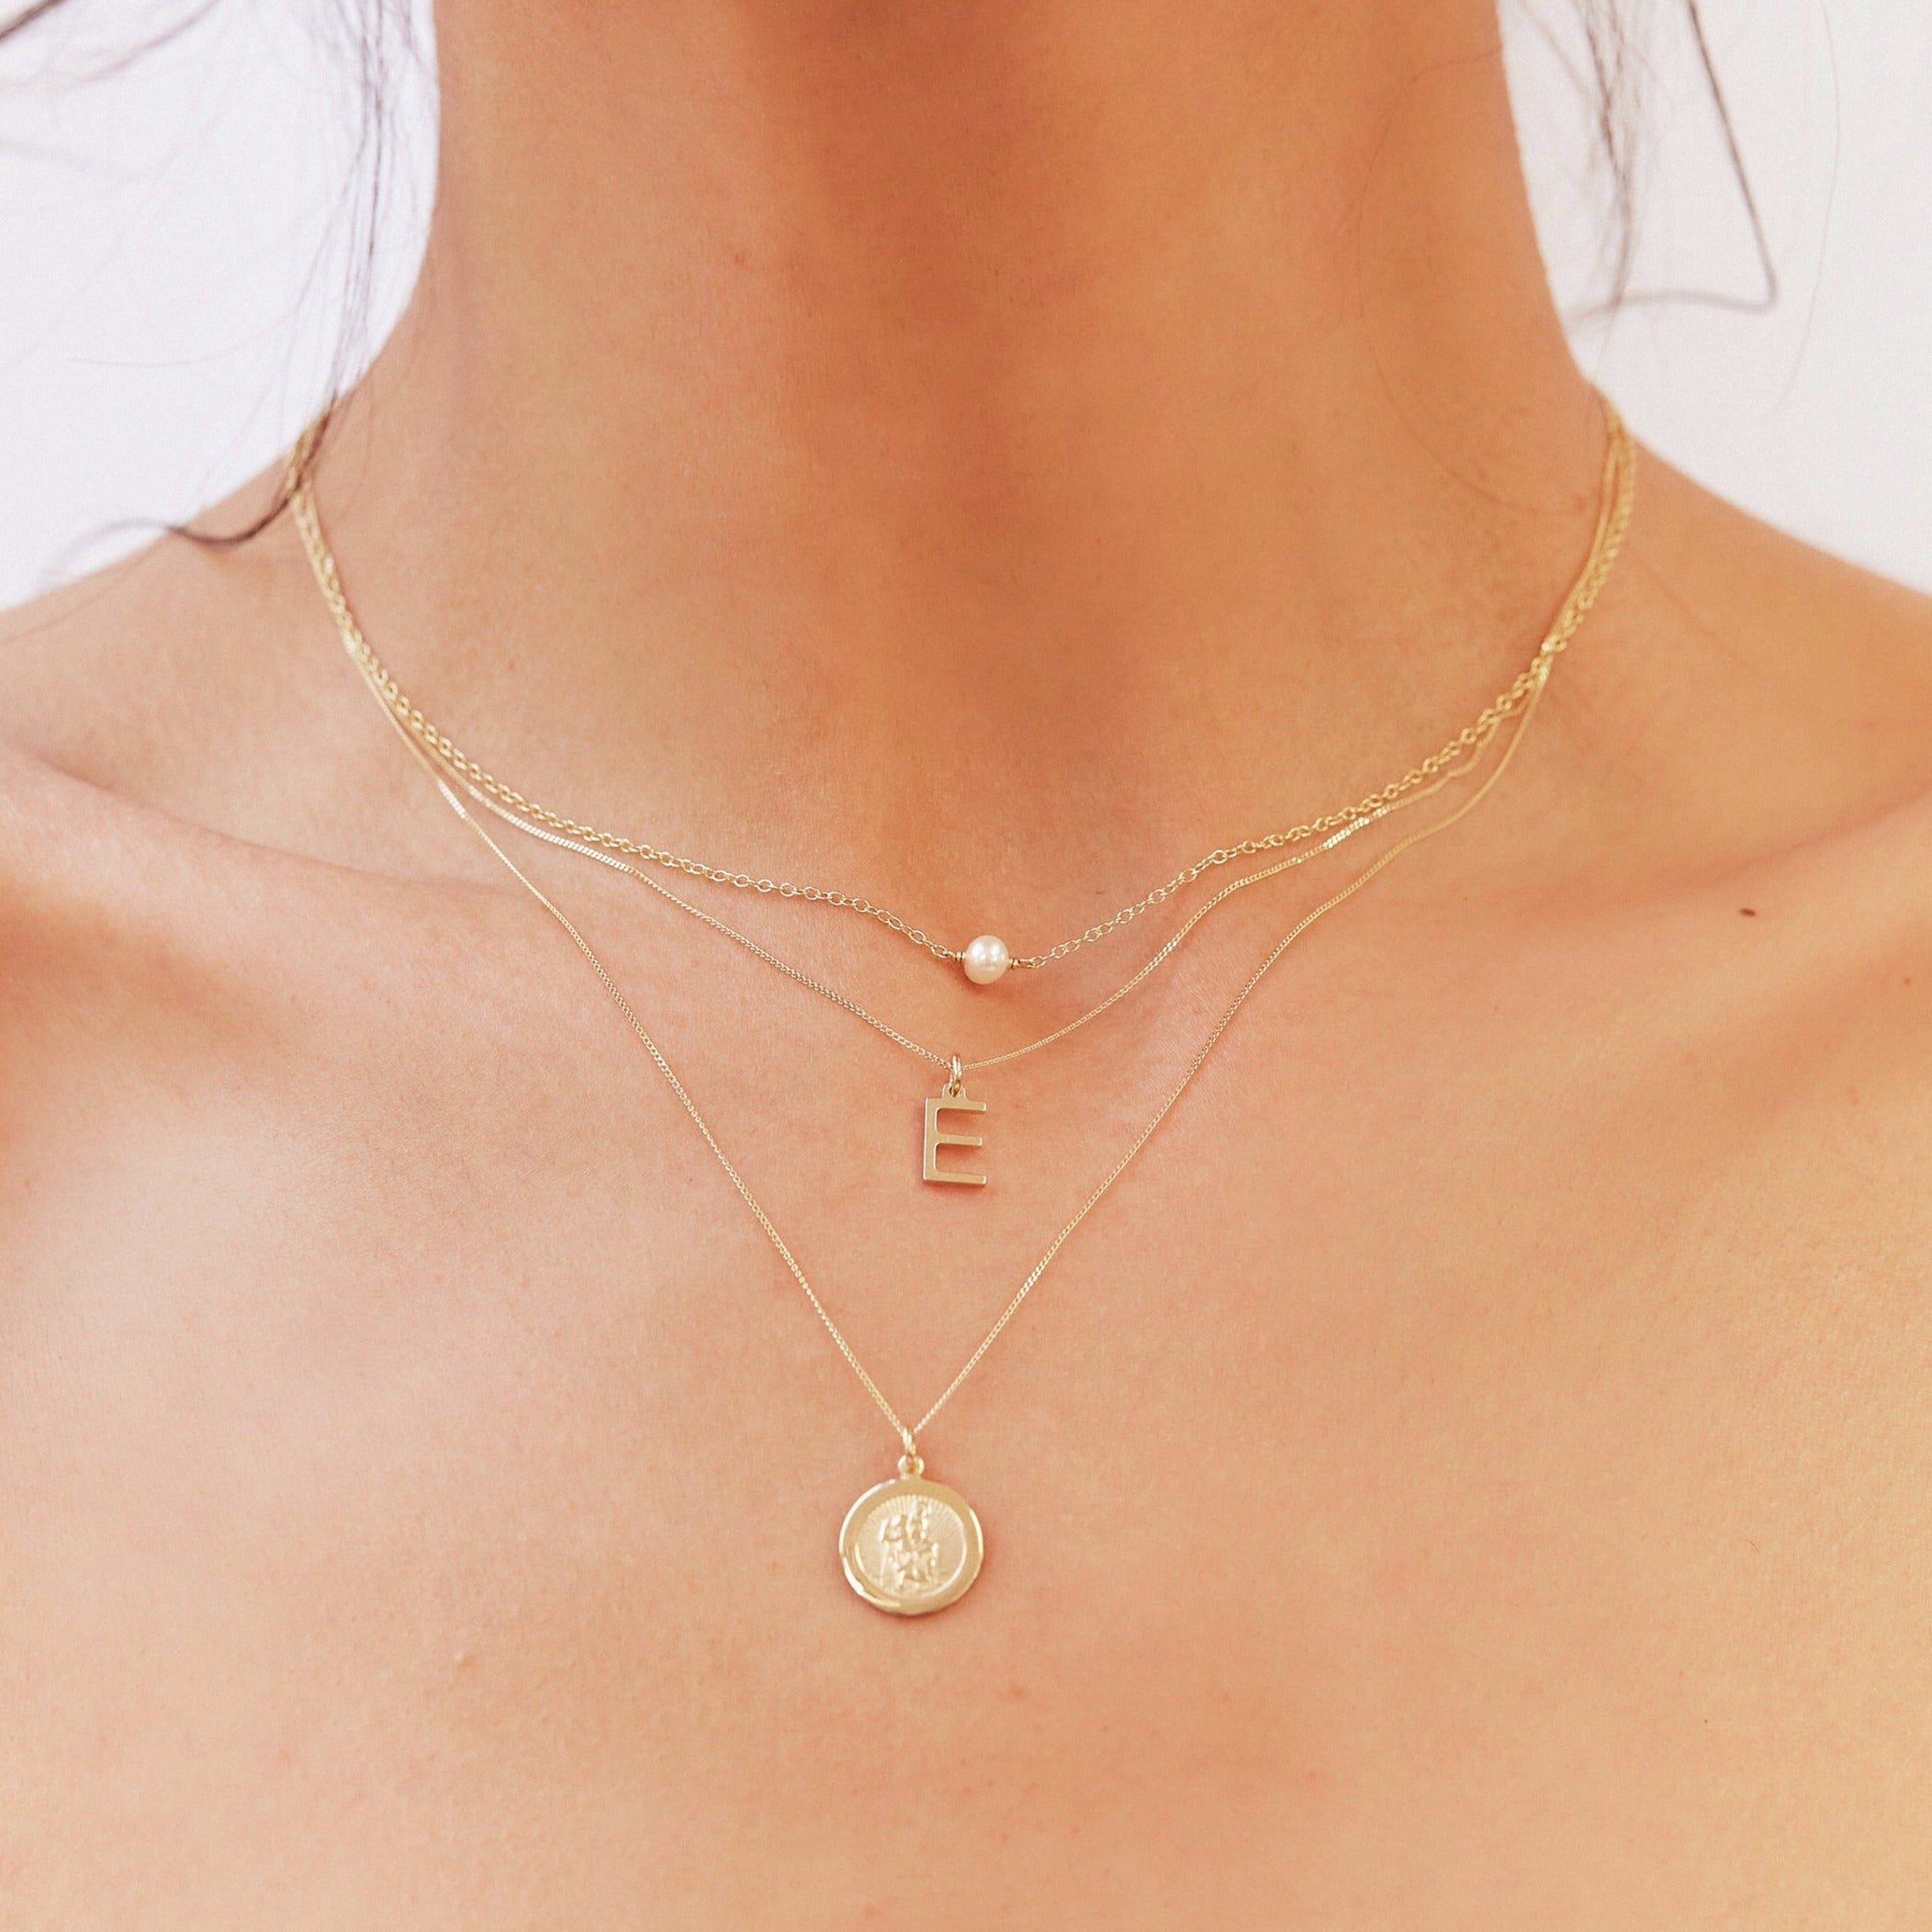 Close up upward angle shot of a neck wearing a gold single pearl choker layered with a gold E letter necklace and gold symbol necklace